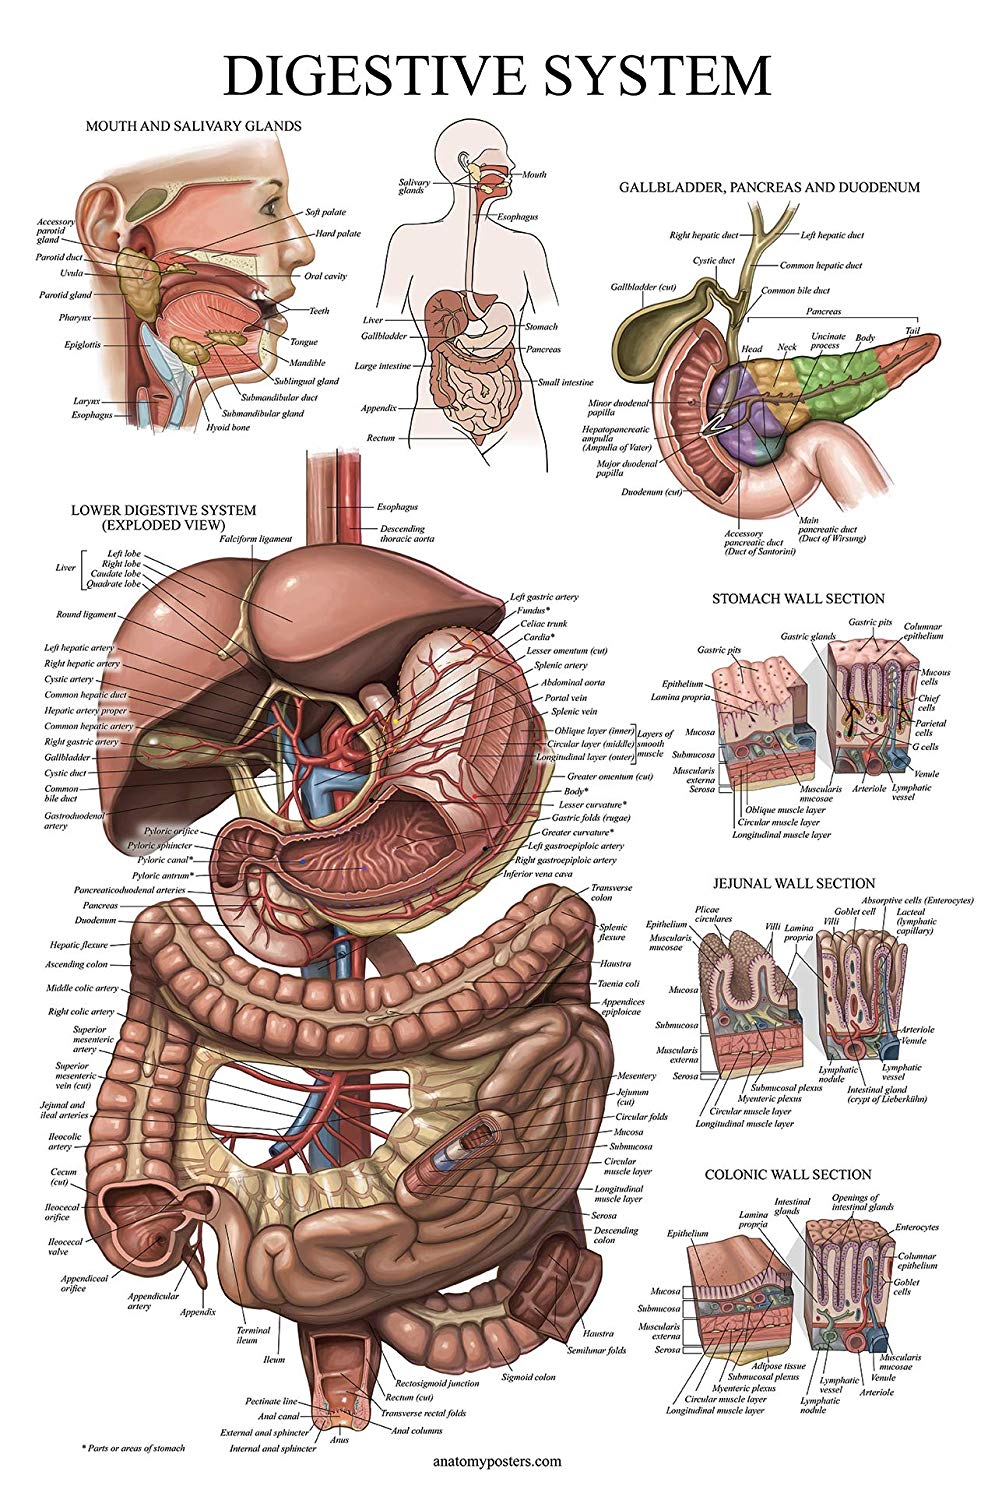 Digestive System – Anatomy Posters